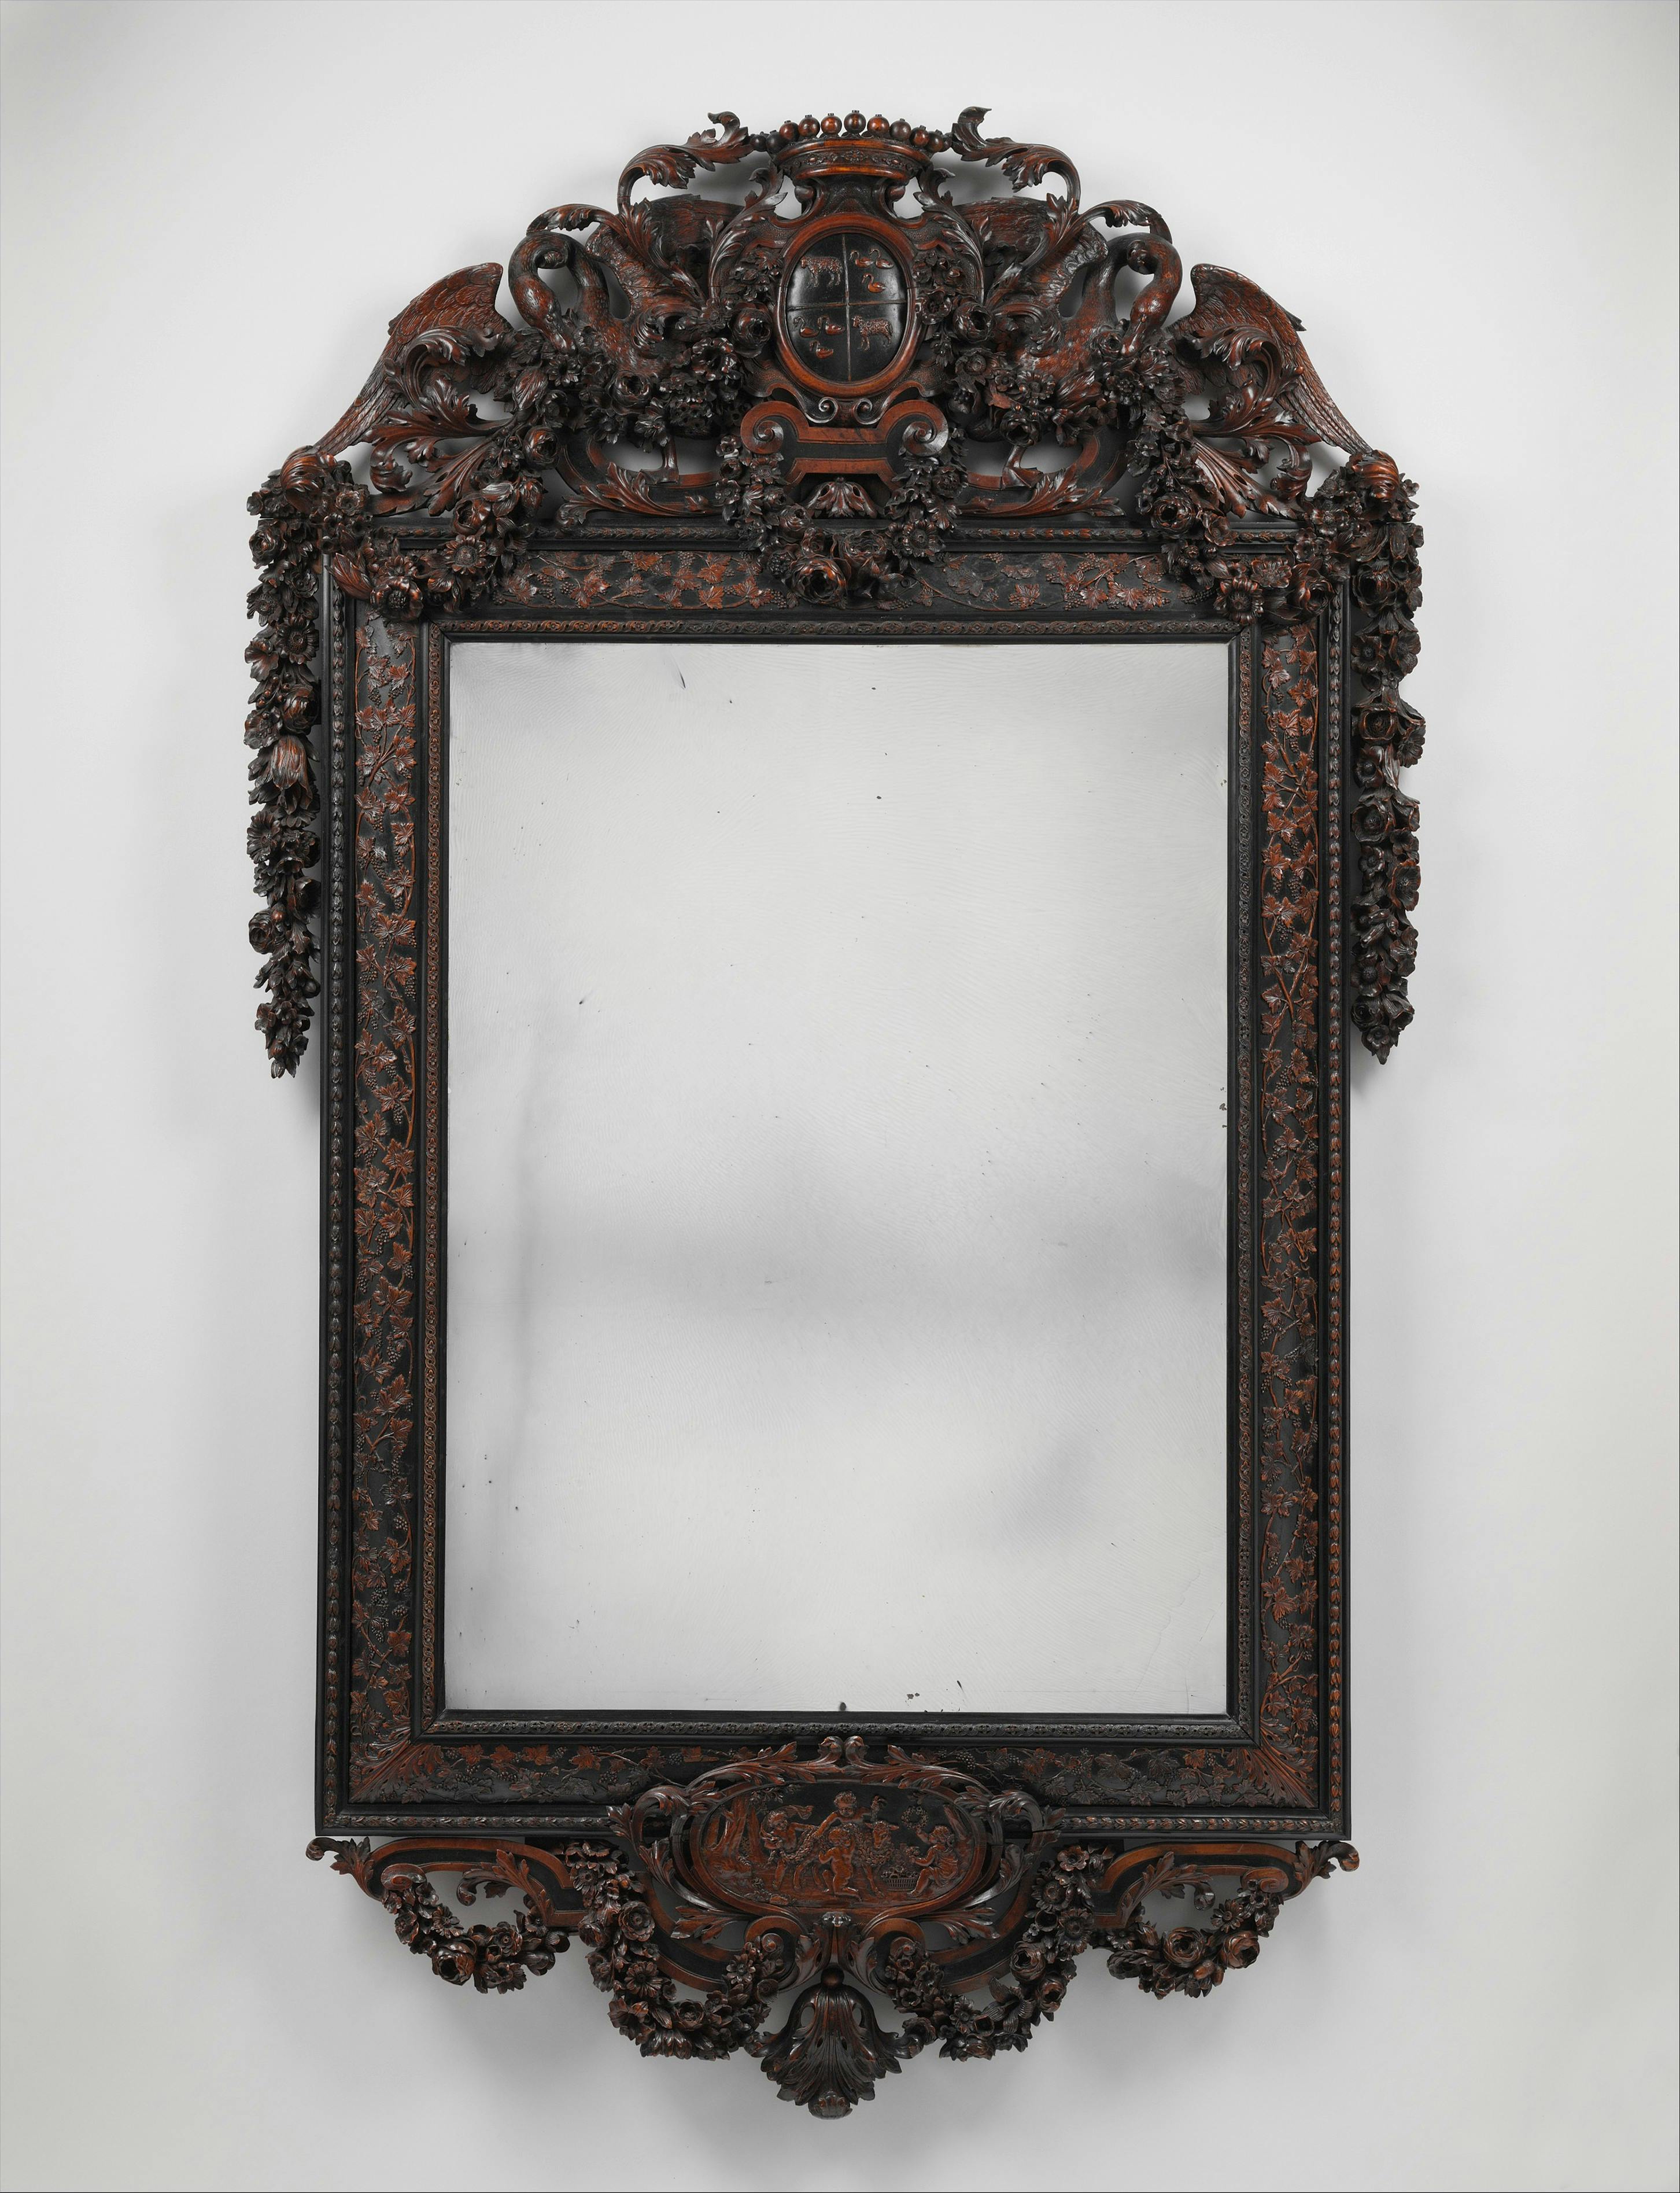 Antique Picture Frame Styles, Values & Identification